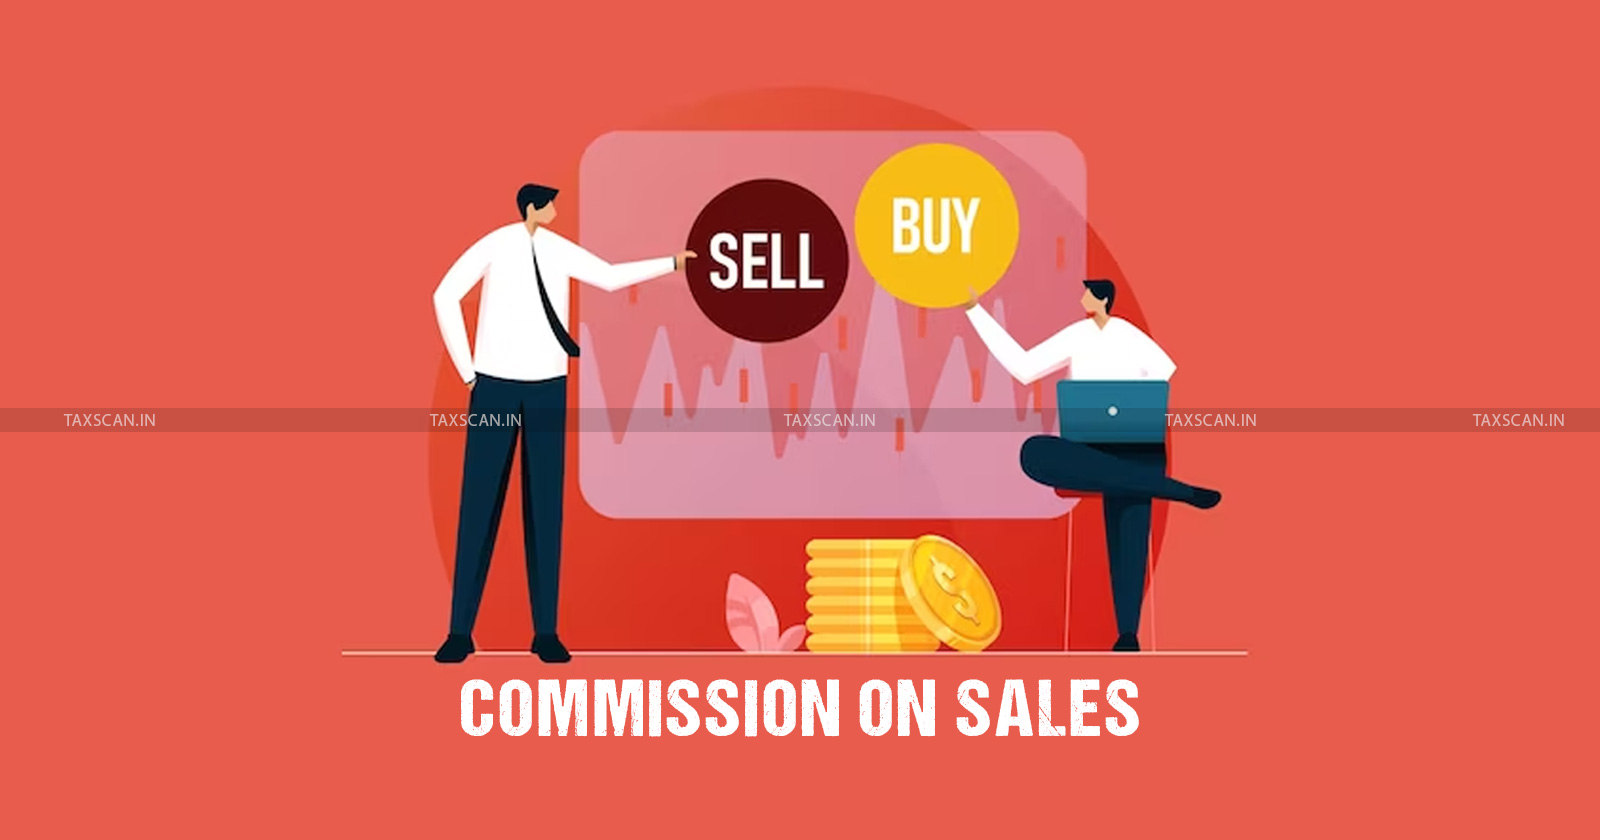 ITAT - disallowance - commission on sales - failure - actual role played by commission agents - commission agents - sales - taxscan